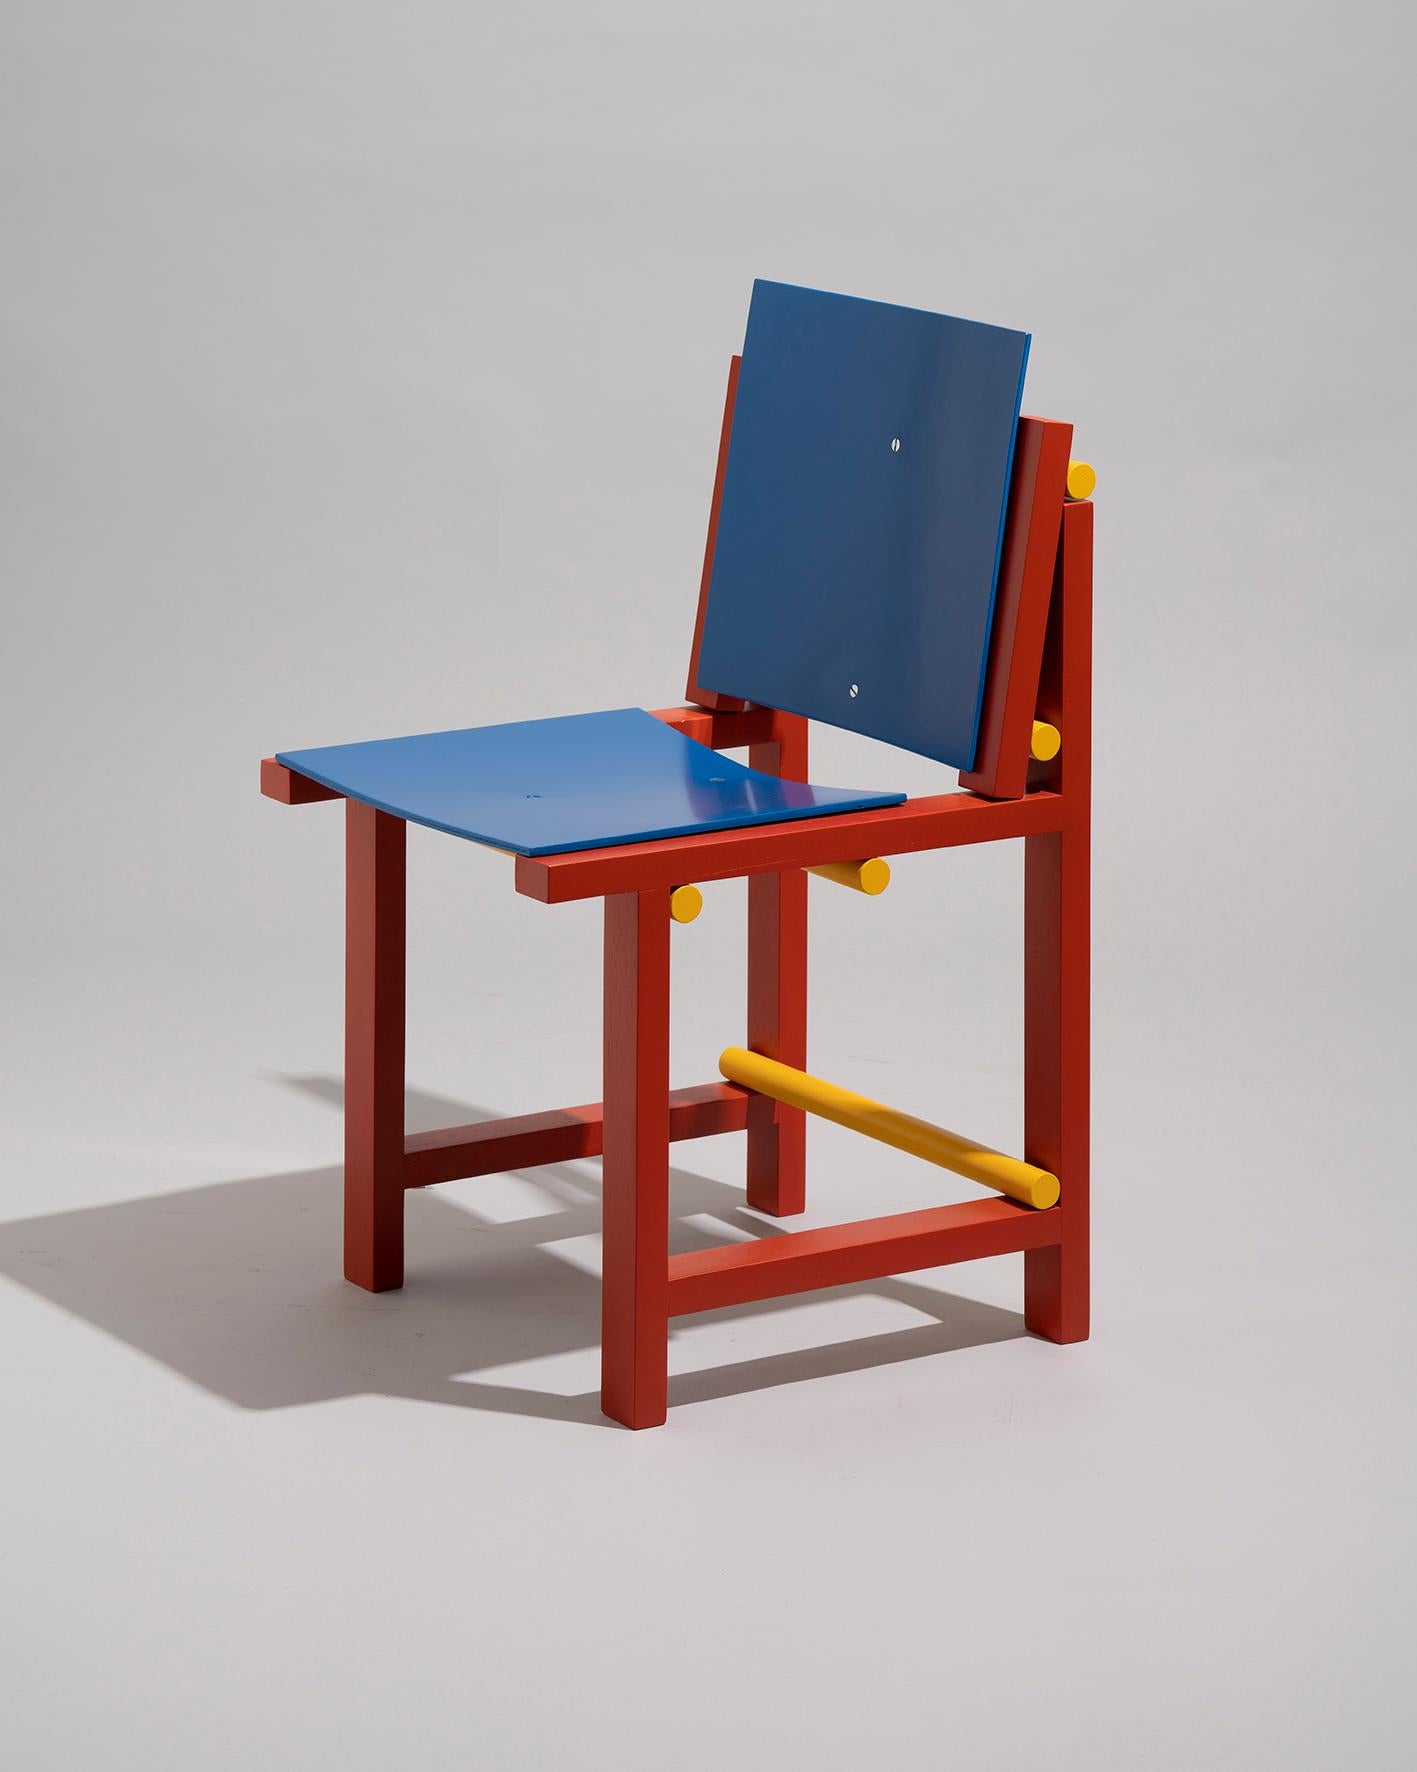 Silla 8 is the result of an exercise where flat plywood sheets are bent, under pressure and in a simple way, using different structures as support, achieving instantaneously and without molds to generate what end up being seats and backrests. The